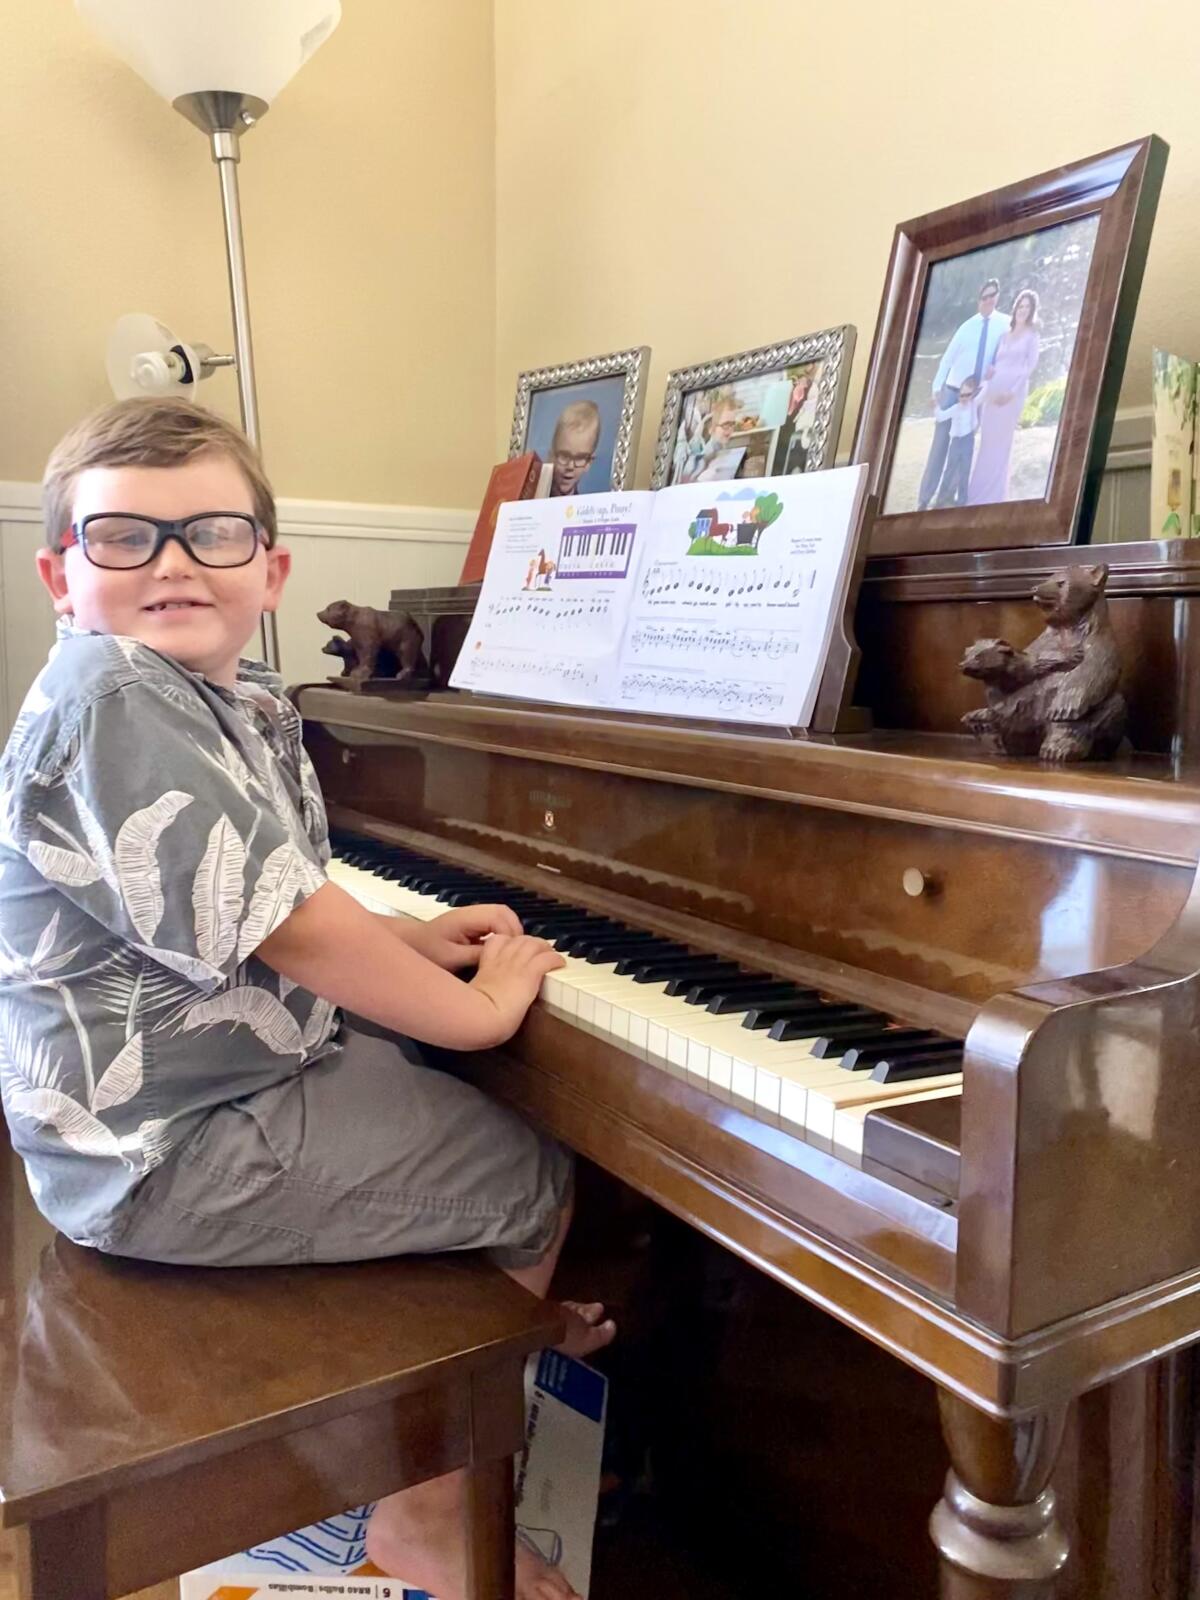 Playing the piano is one activity enjoyed by Huntington Beach resident Karl Seitz, who is visually impaired.